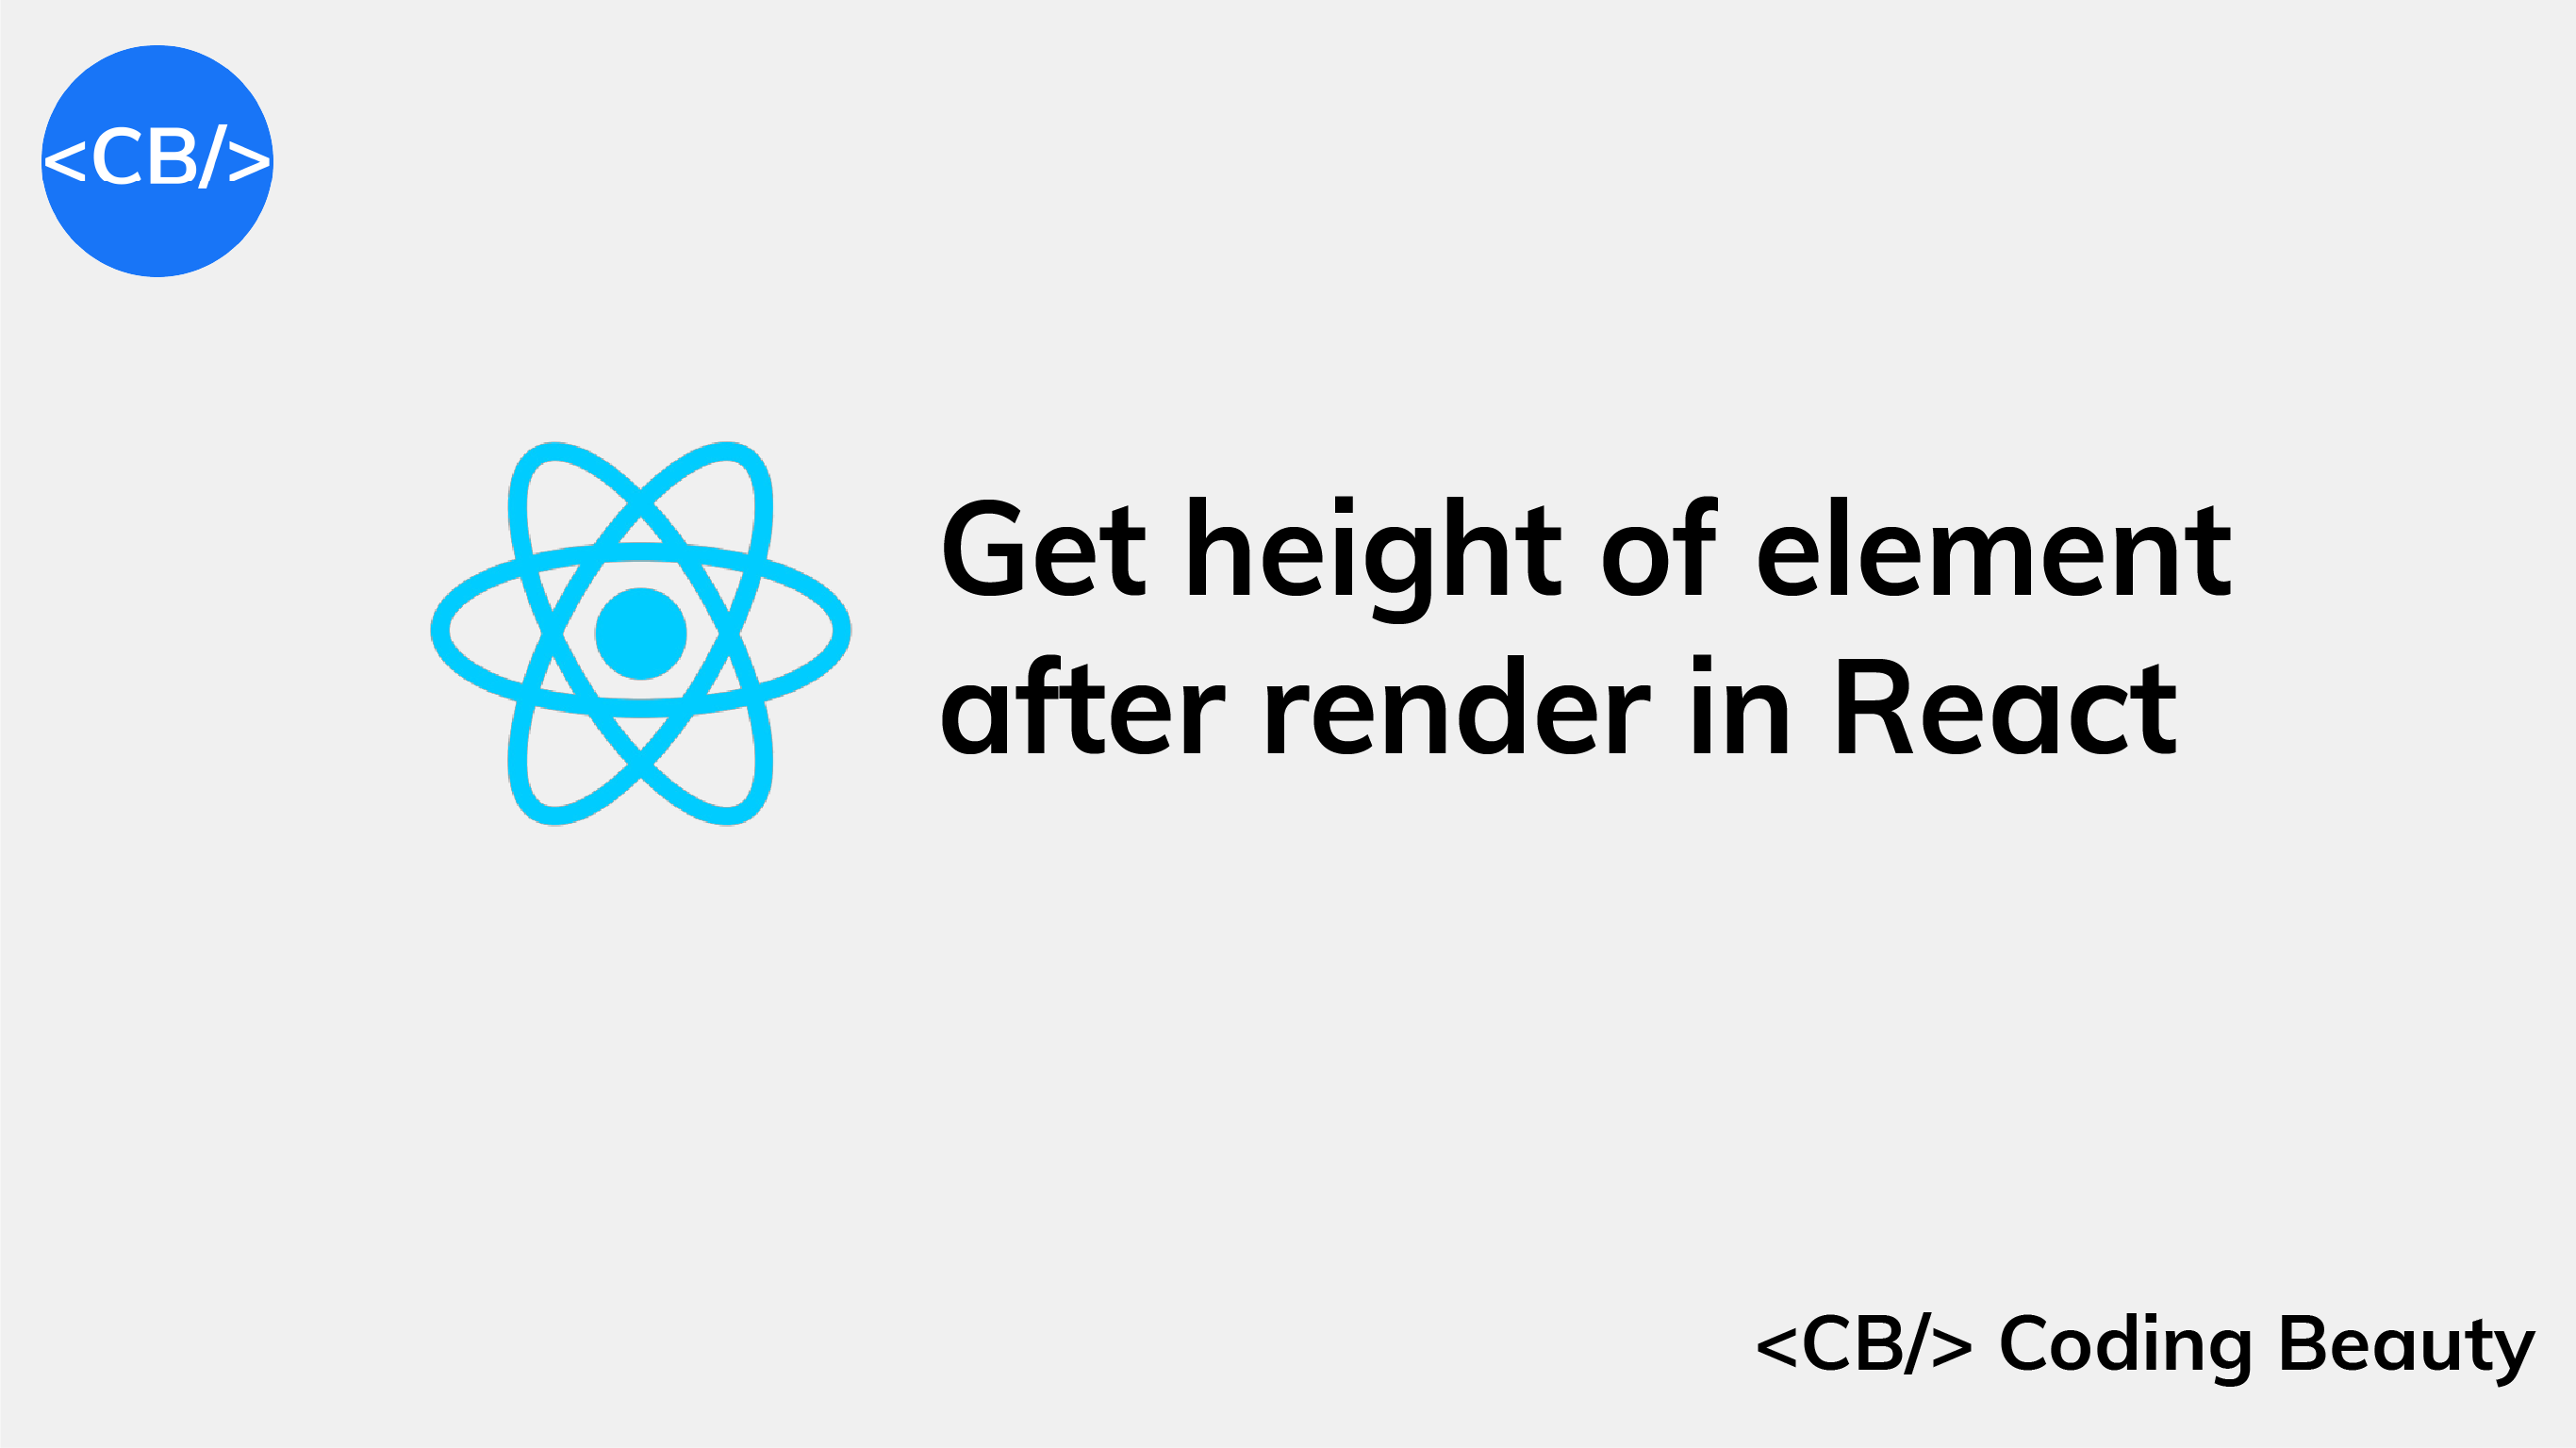 How to Get the Height of an Element After Render in React